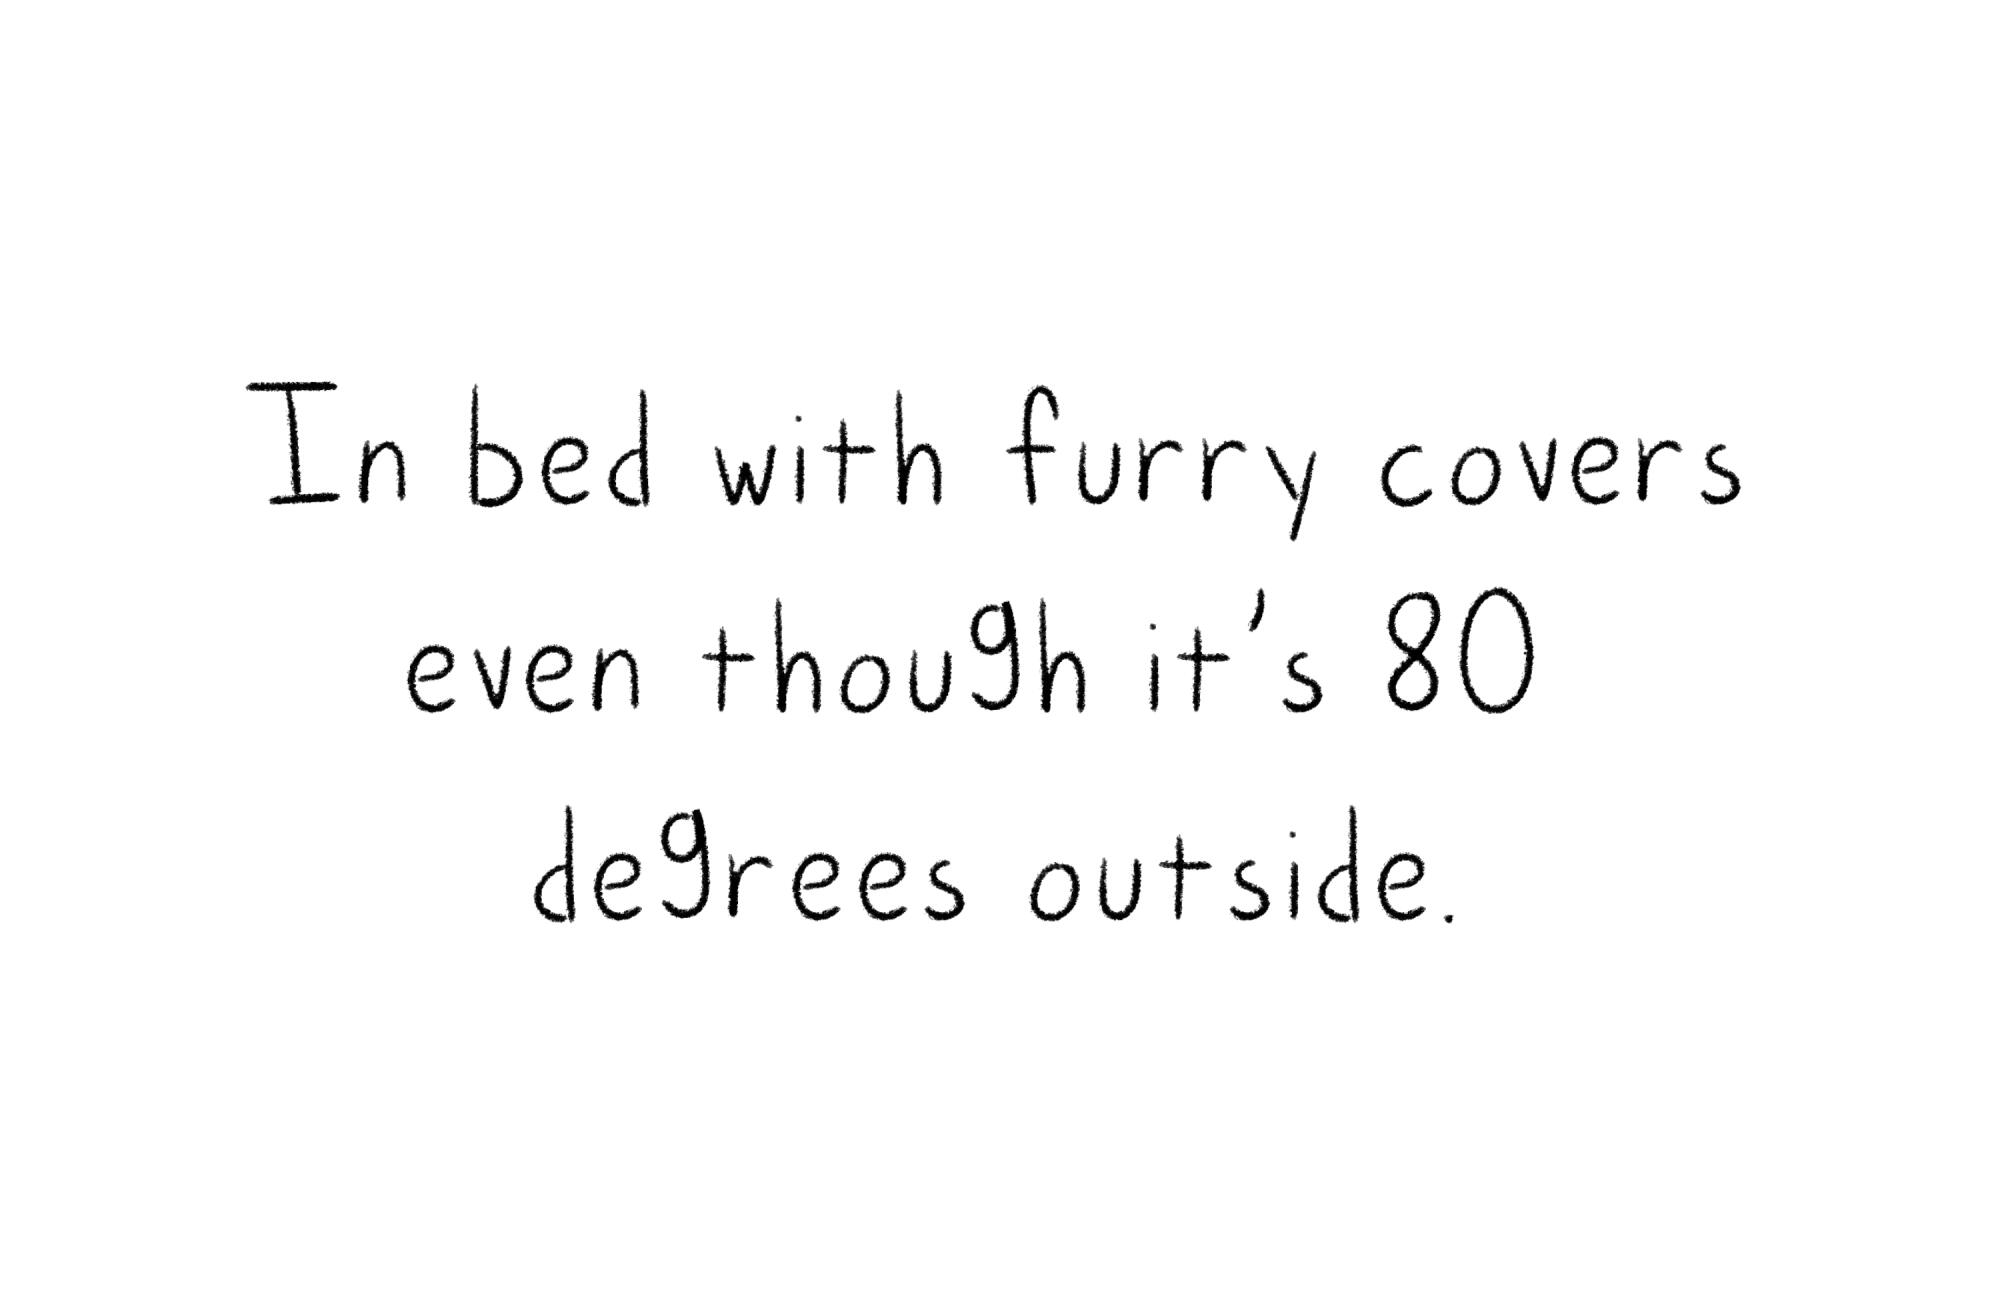 The words "In bed with furry covers even though it's 80 degrees outside."